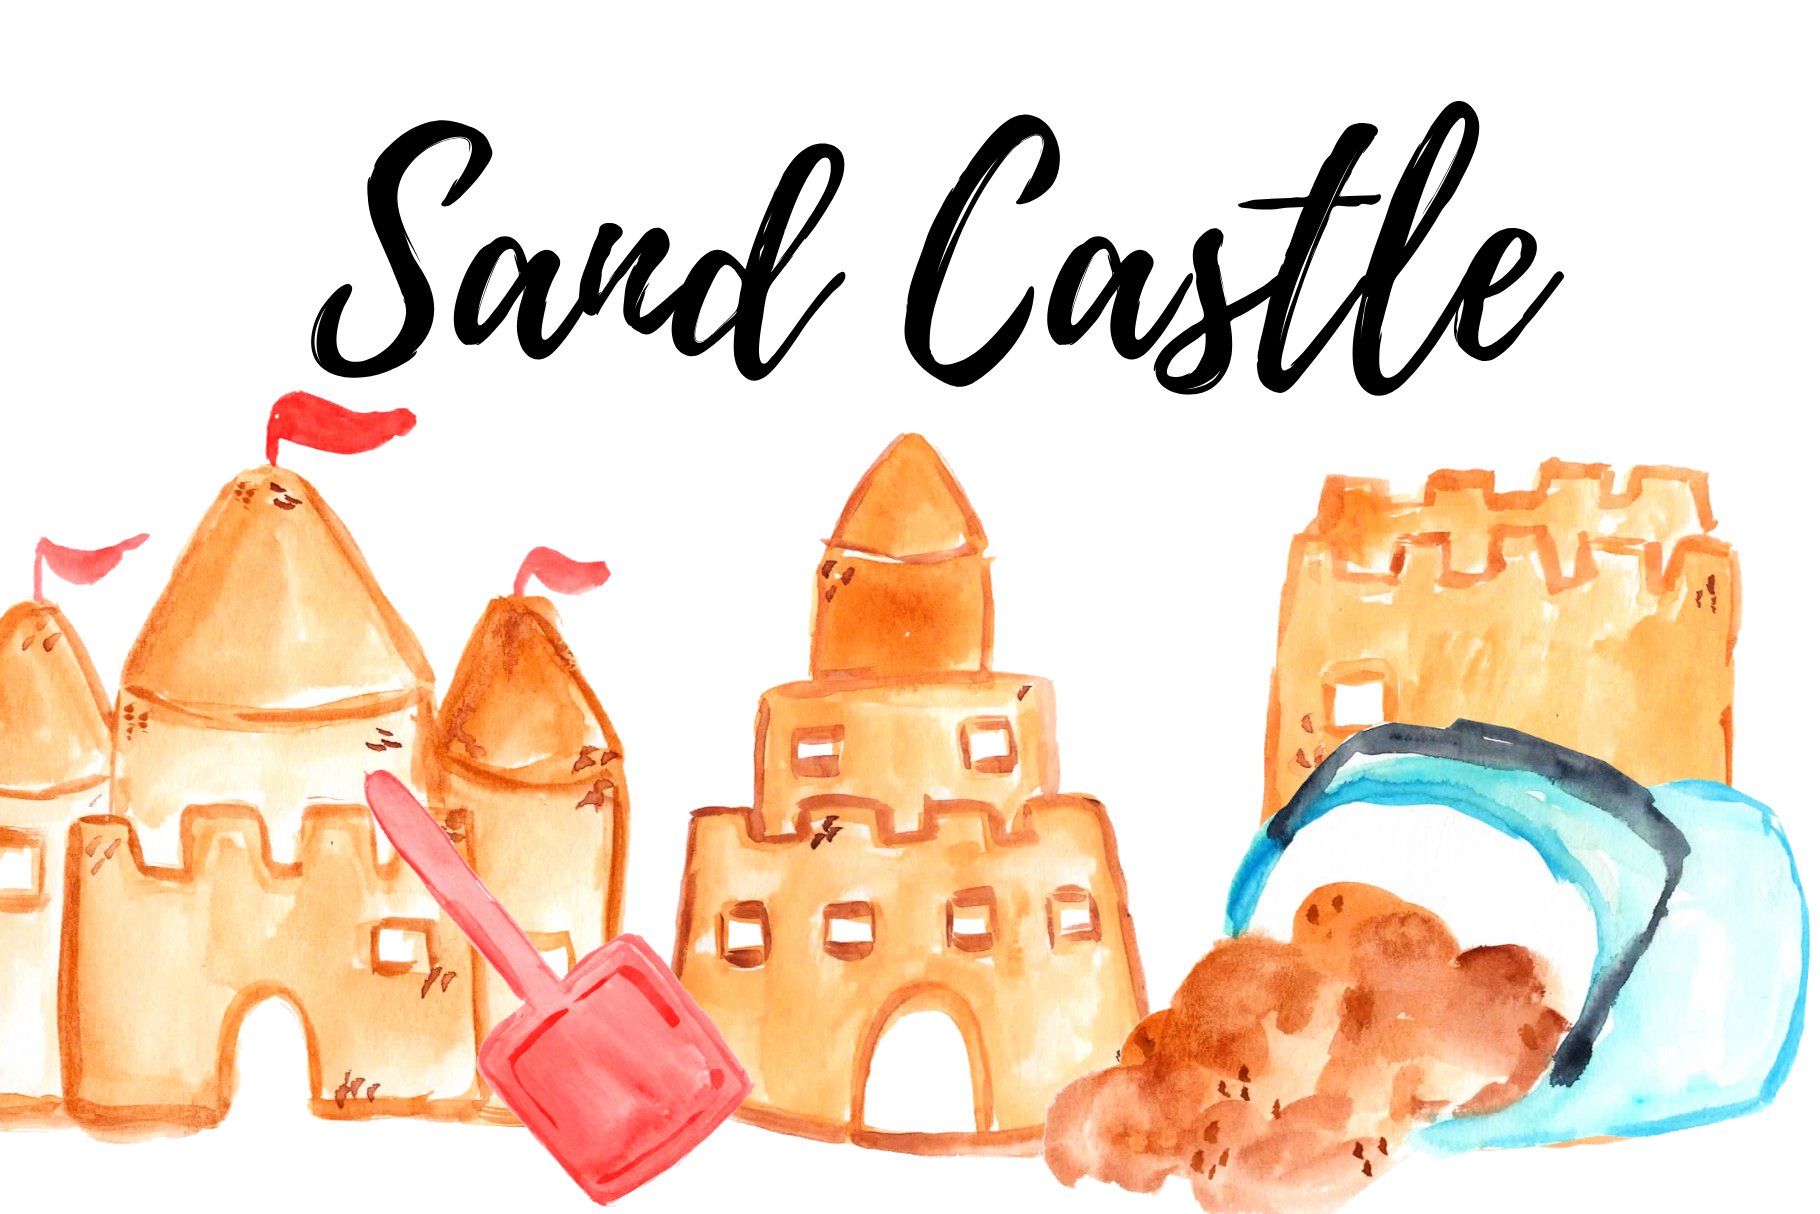 Summer Beach Sand Castle Clipart cover image.